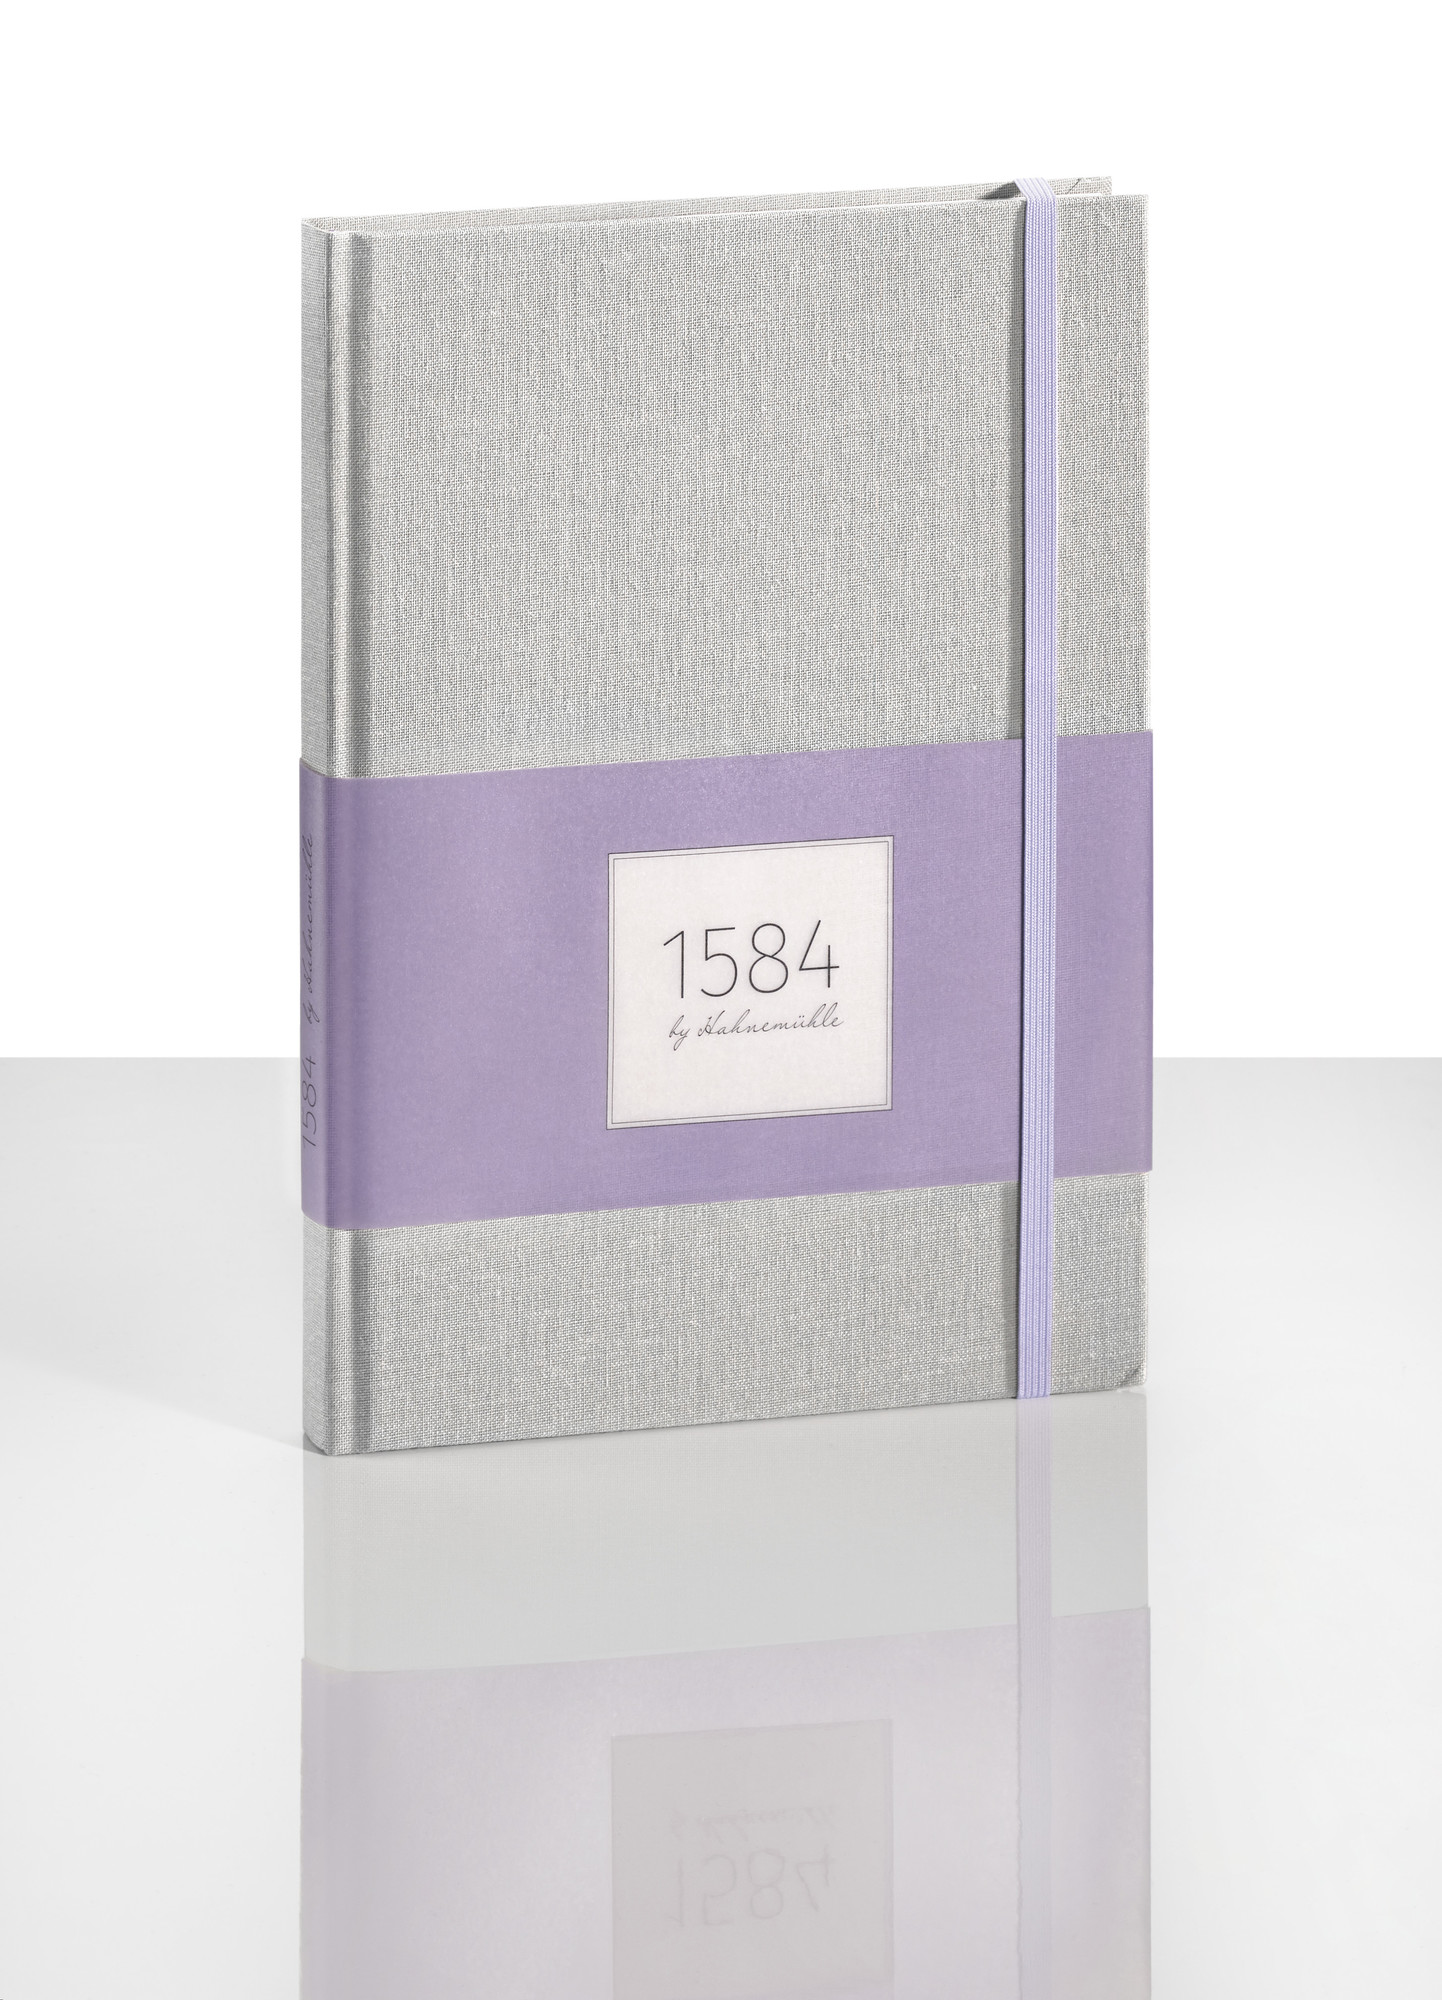 The 1584 Notebook from Hahnemühle